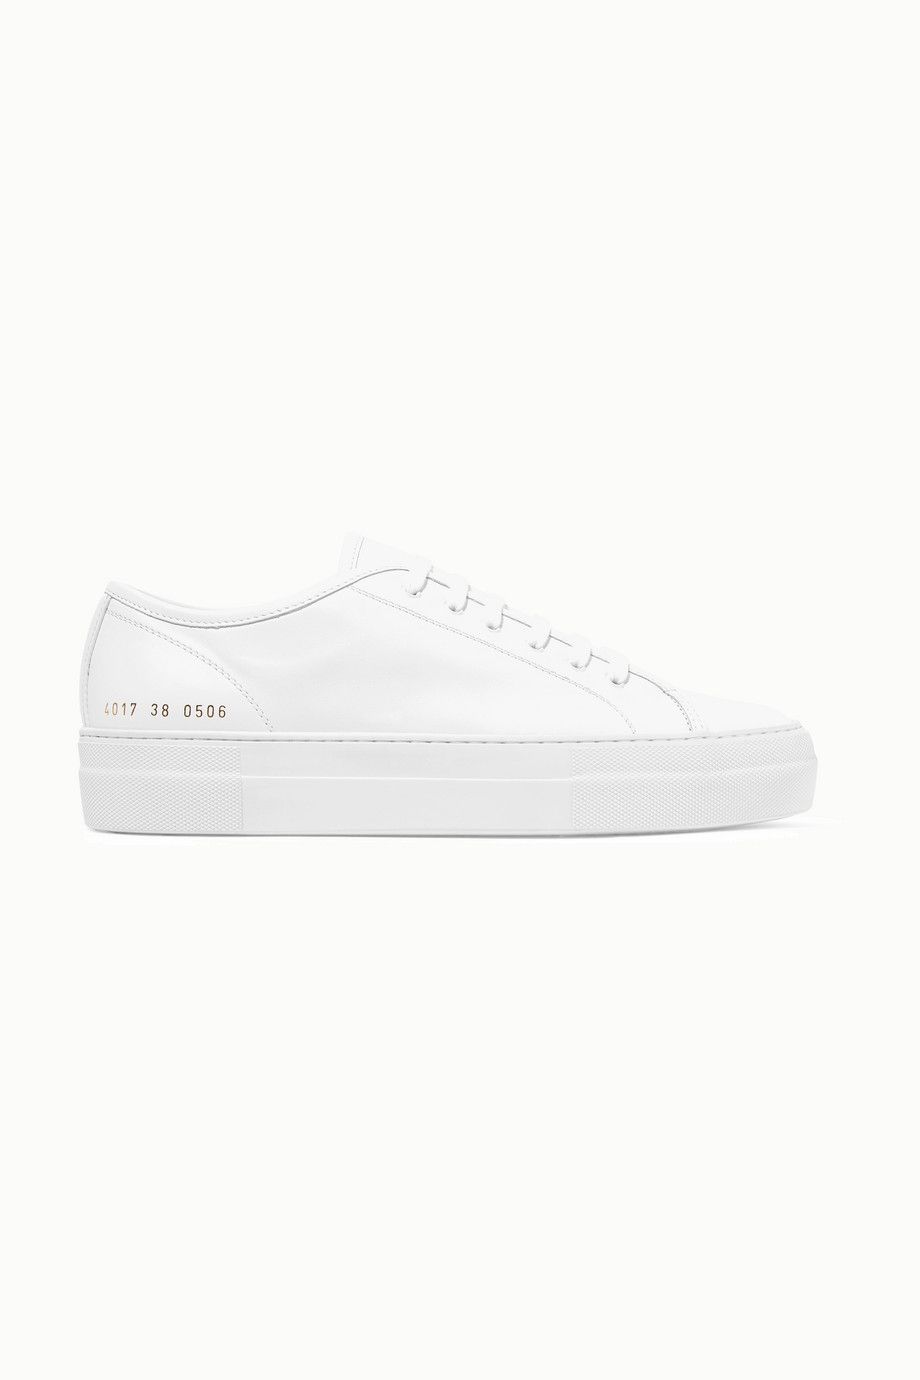 nicest white trainers